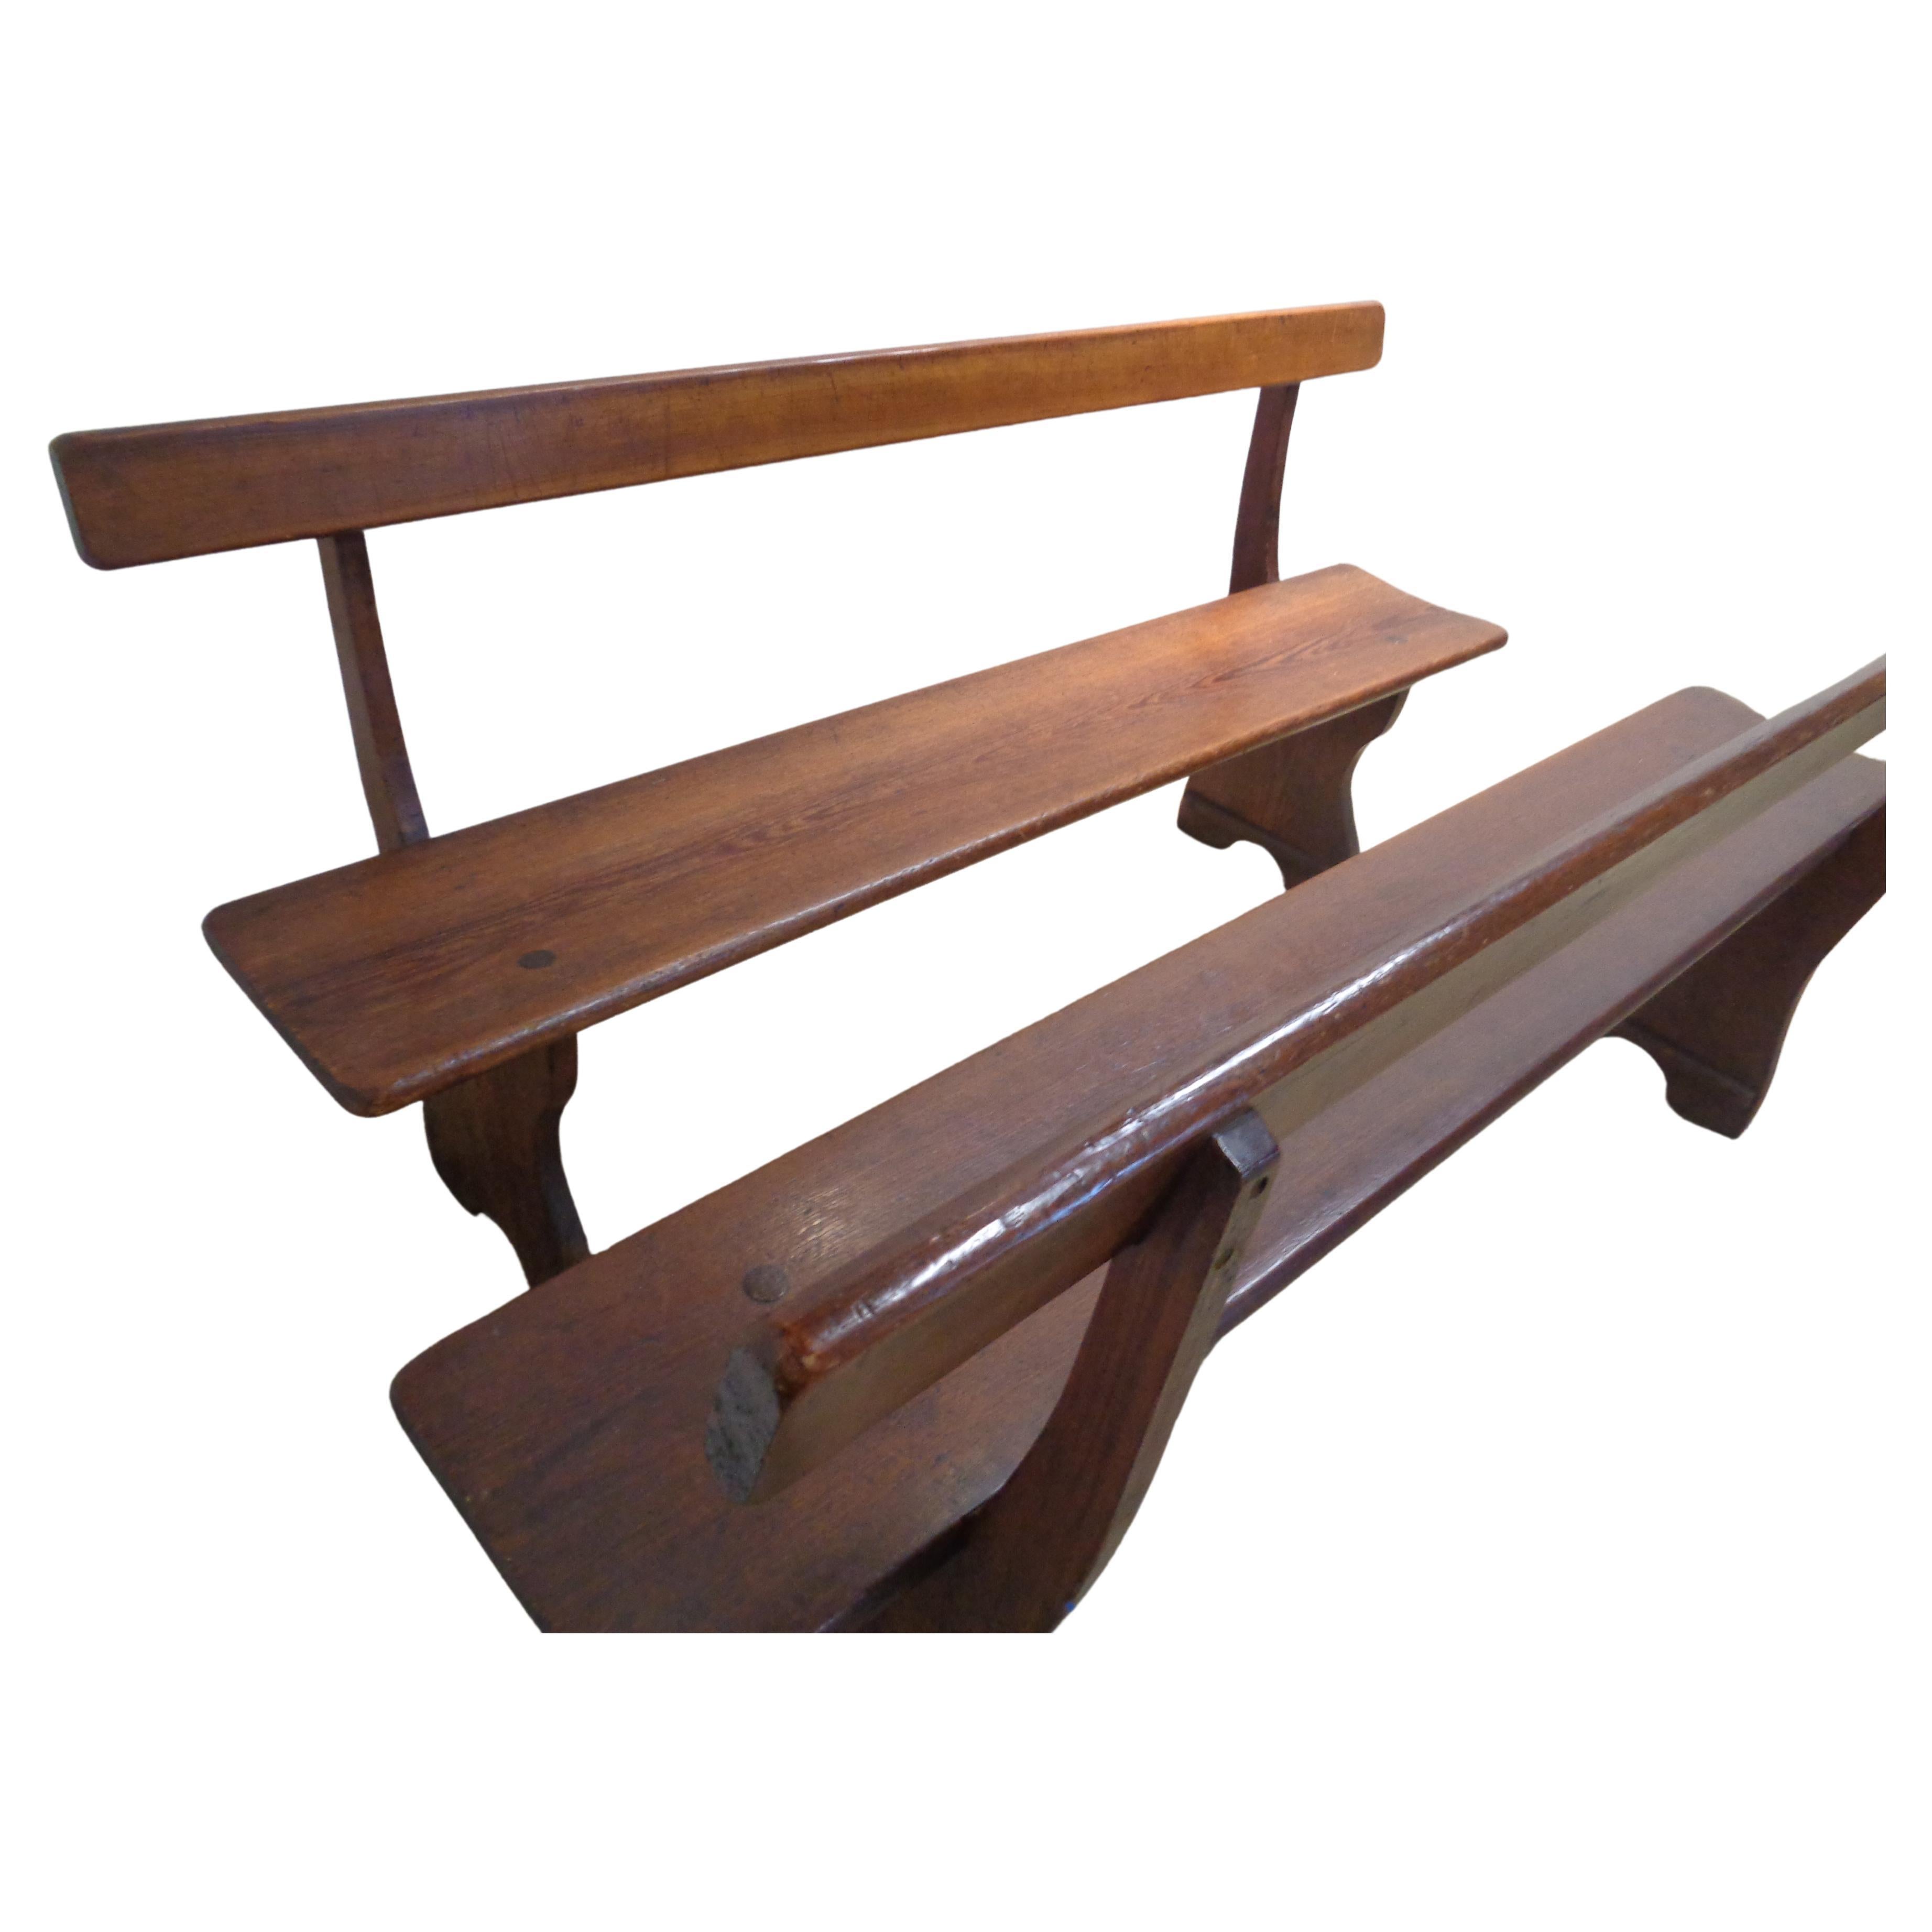  Exceptional Antique American Country Benches For Sale 5